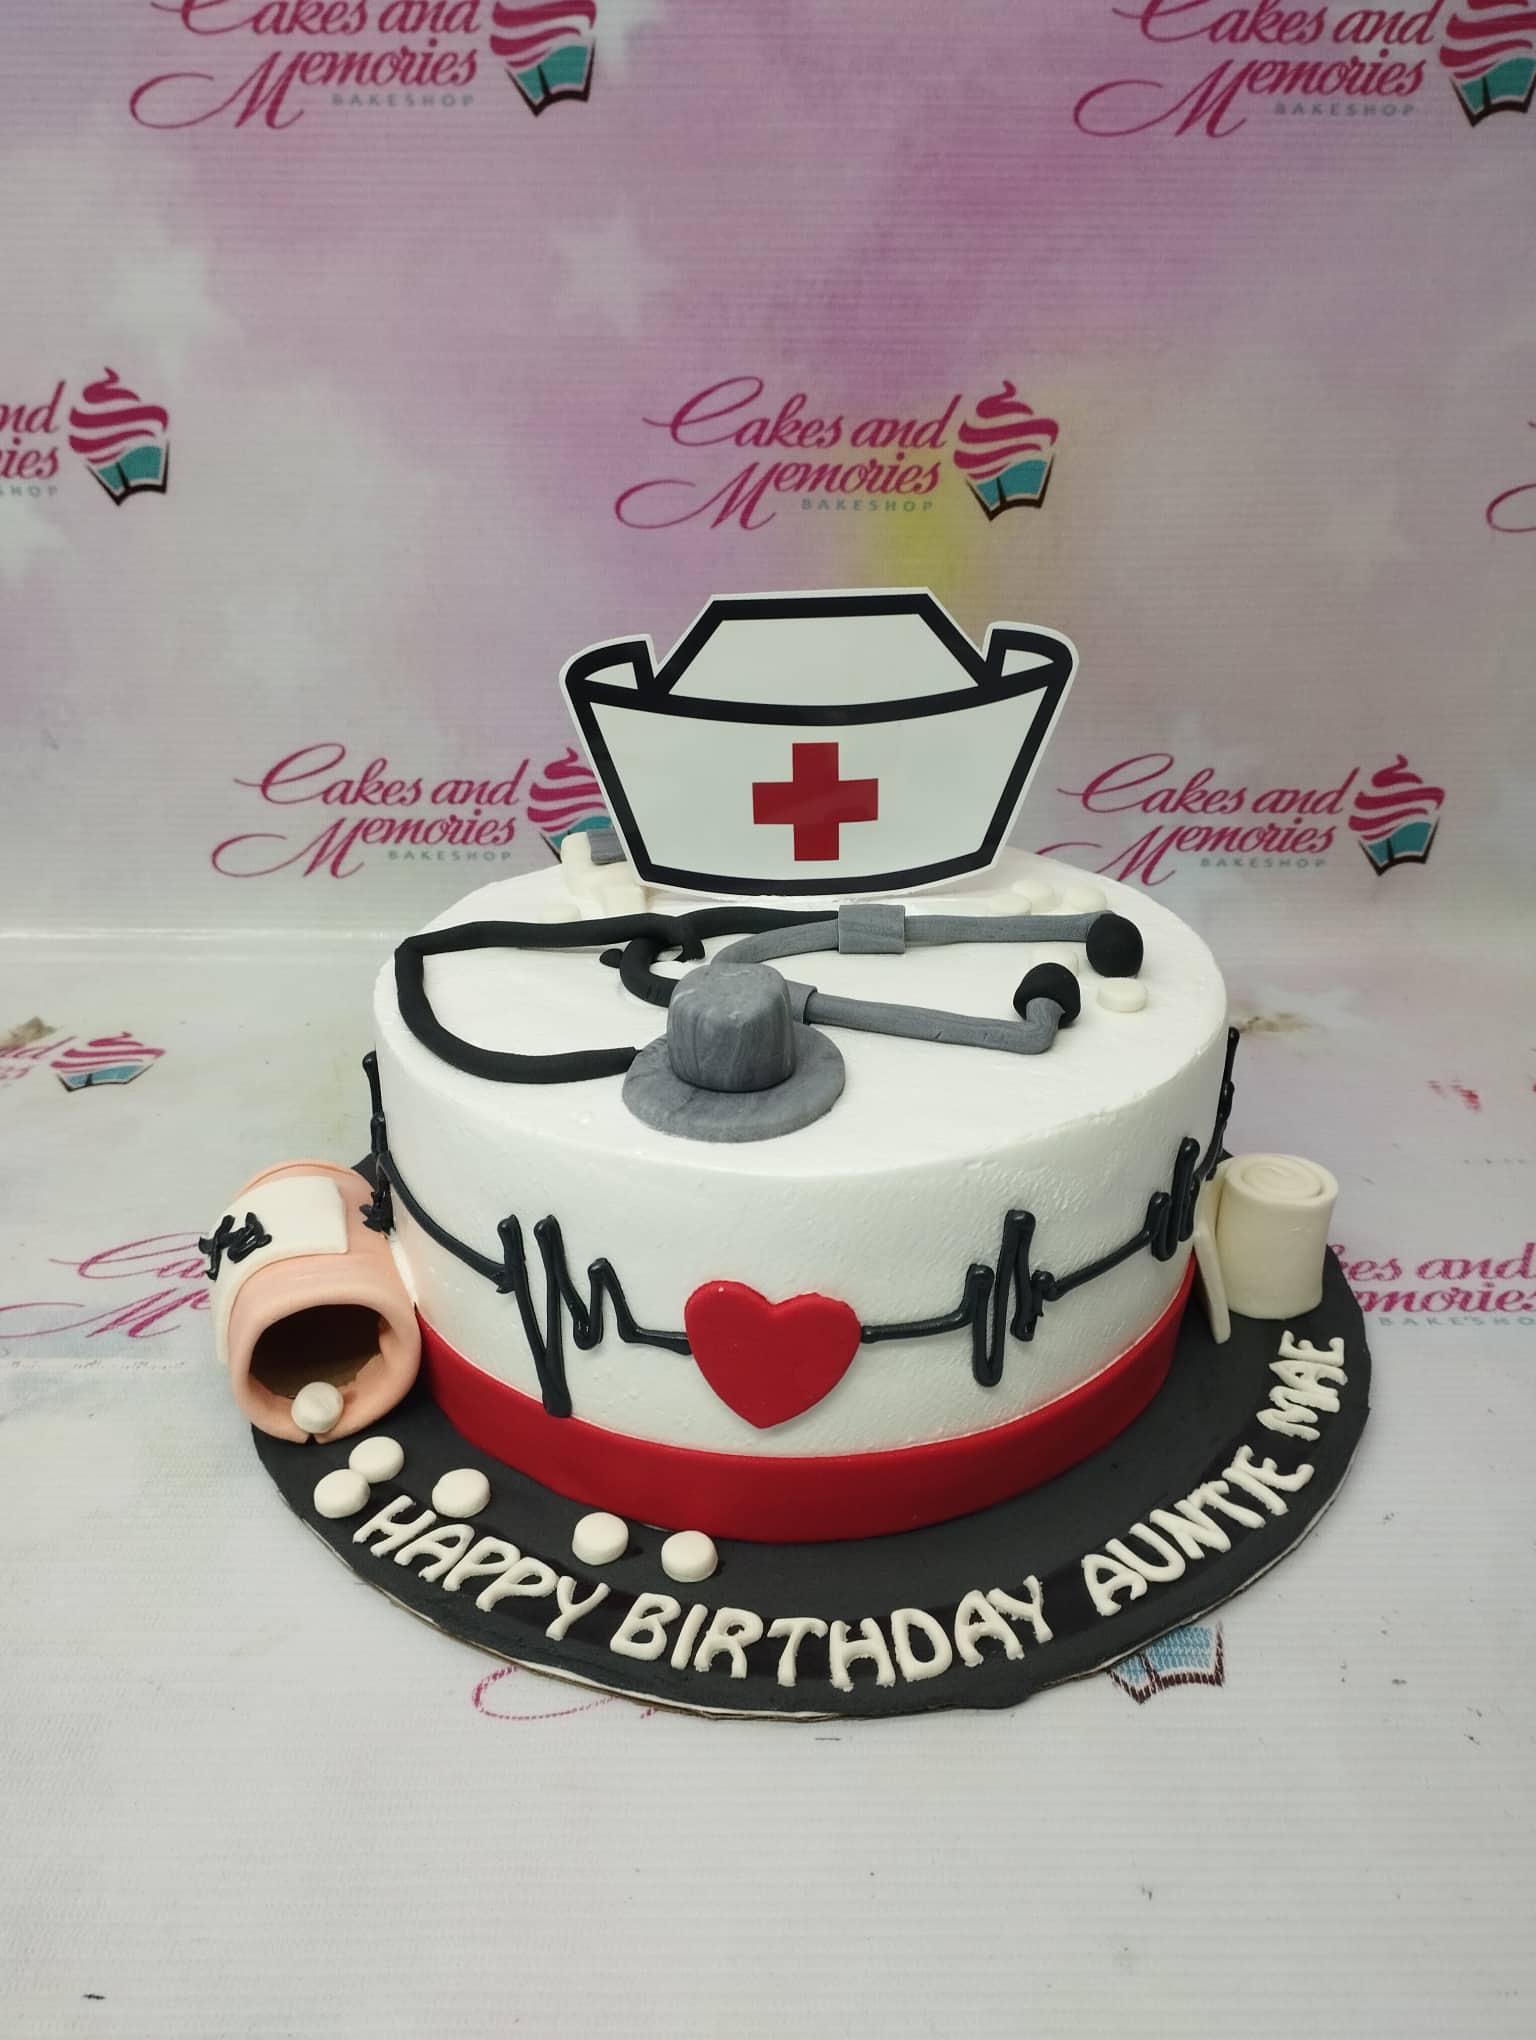 Nurse cakes : HERE Discover the most popular ideas ❤️